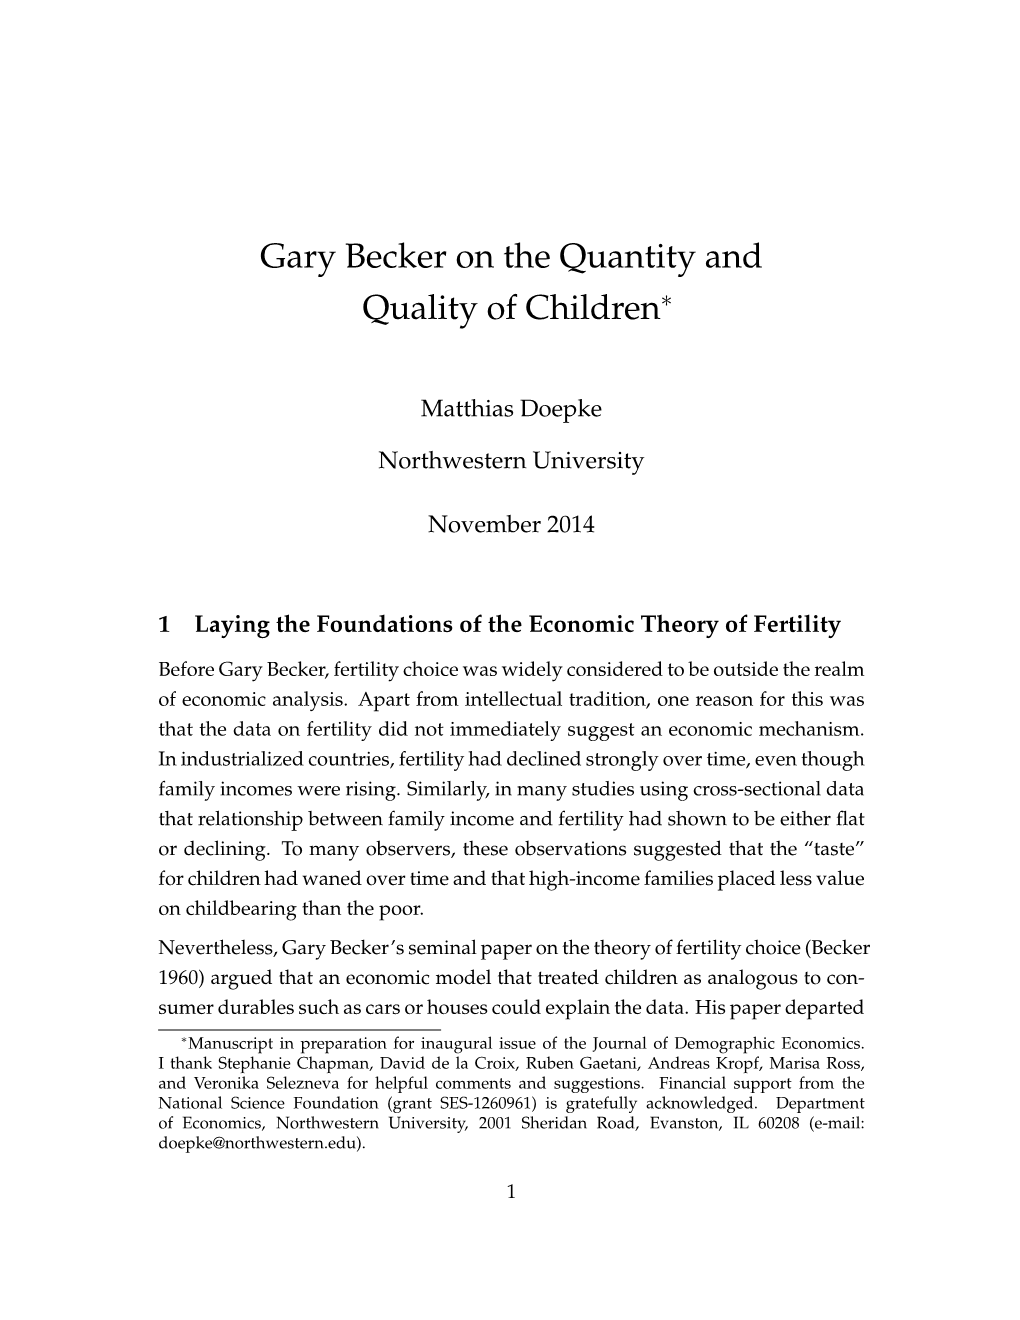 Gary Becker on the Quantity and Quality of Children∗